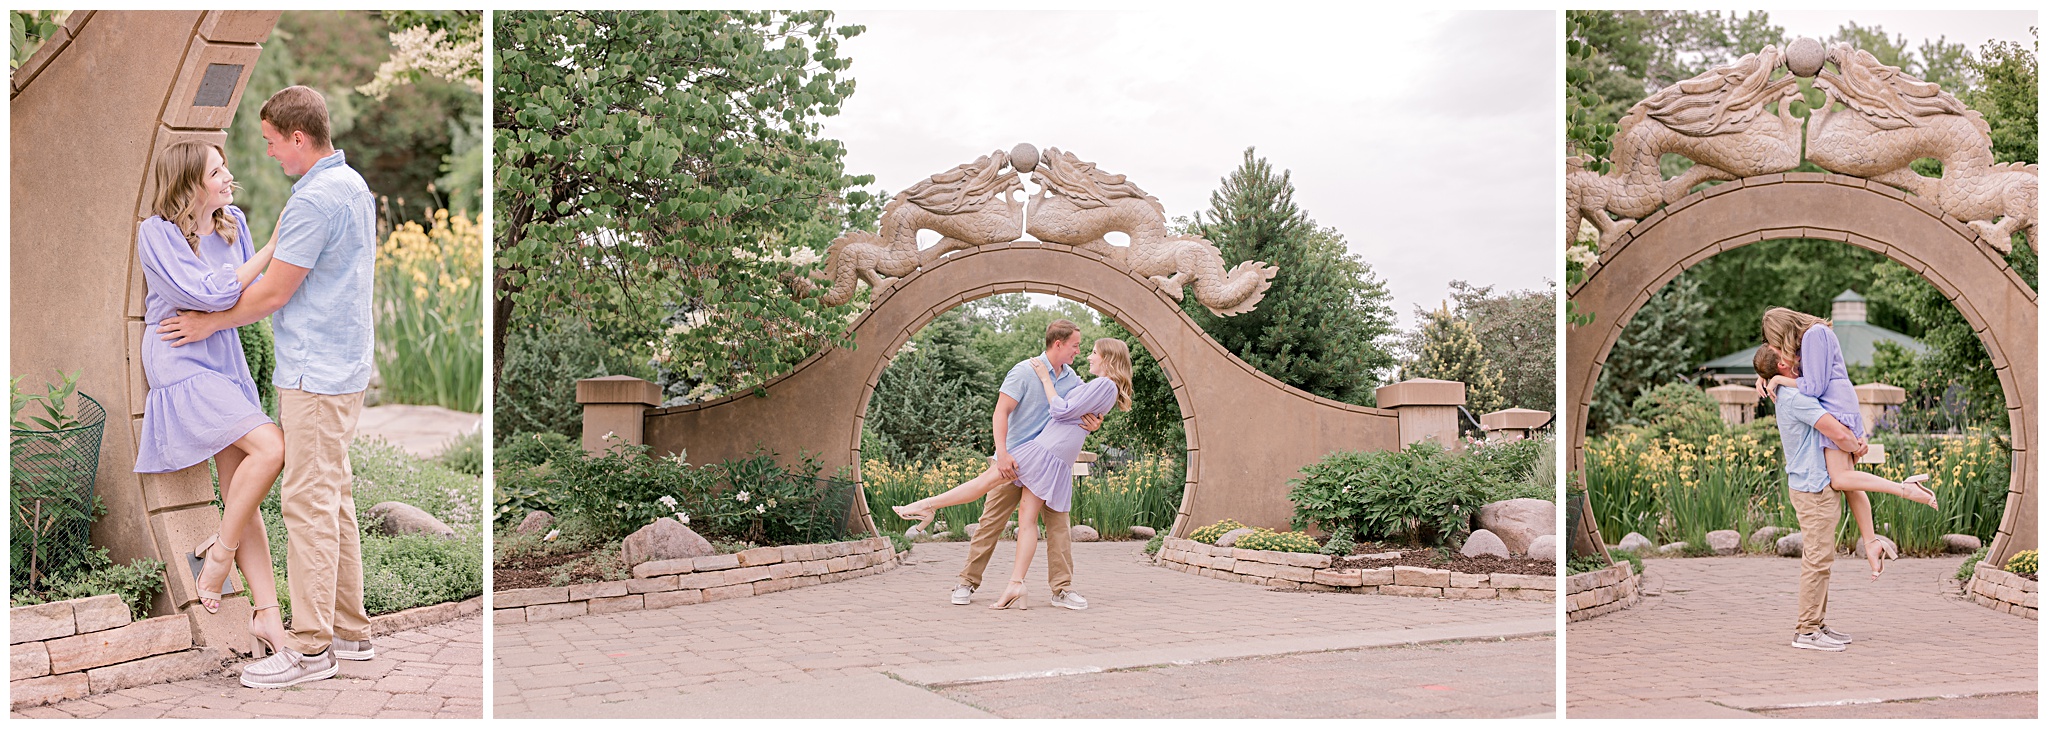 Nature-Inspired Engagement Session  La Crosse WI by Volkman Photography